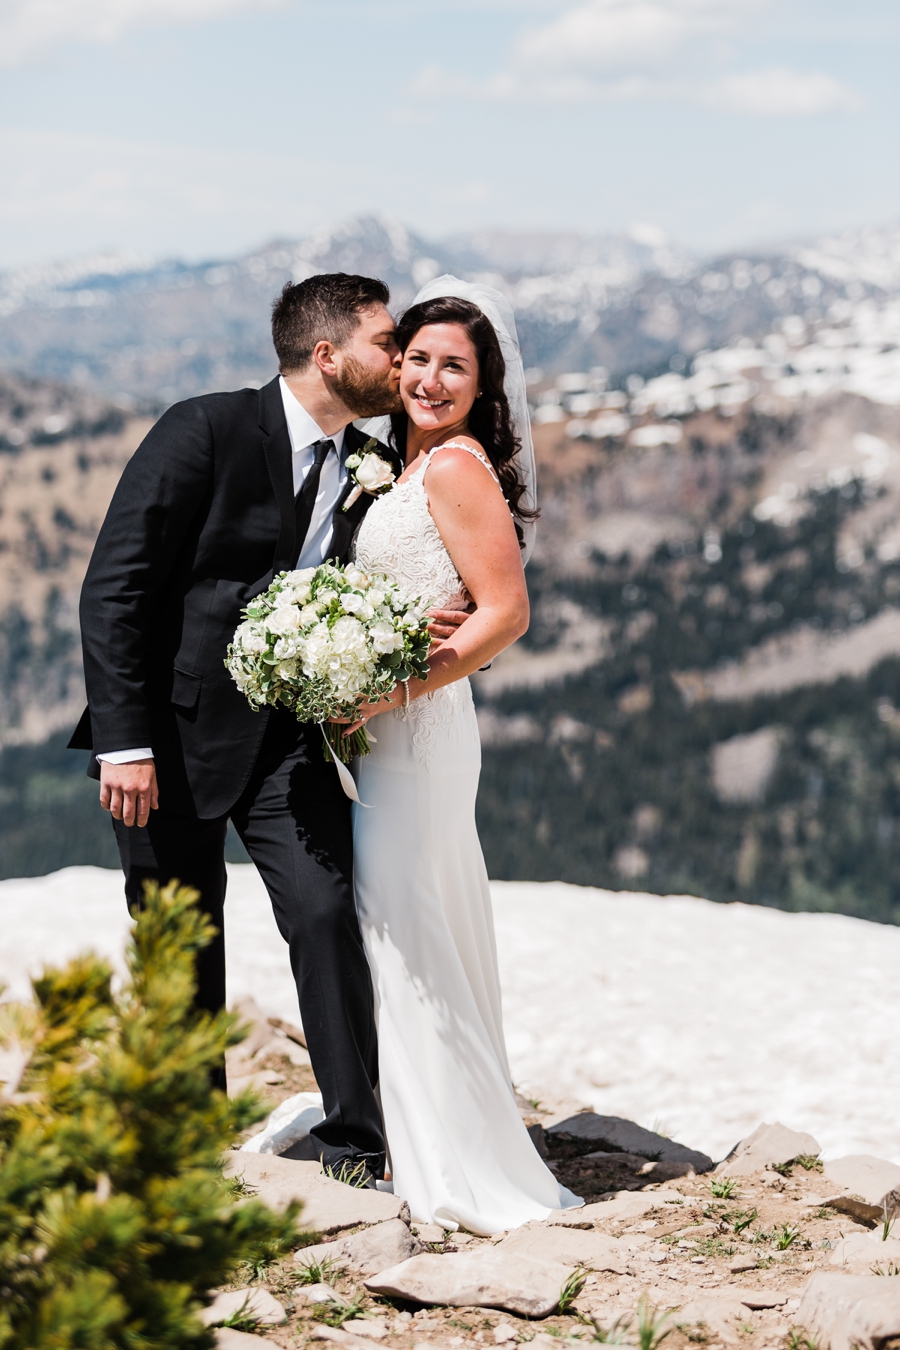 A bride and groom take photos with mountain wedding photographer Amy Galbraith at Grand Targhee Resort